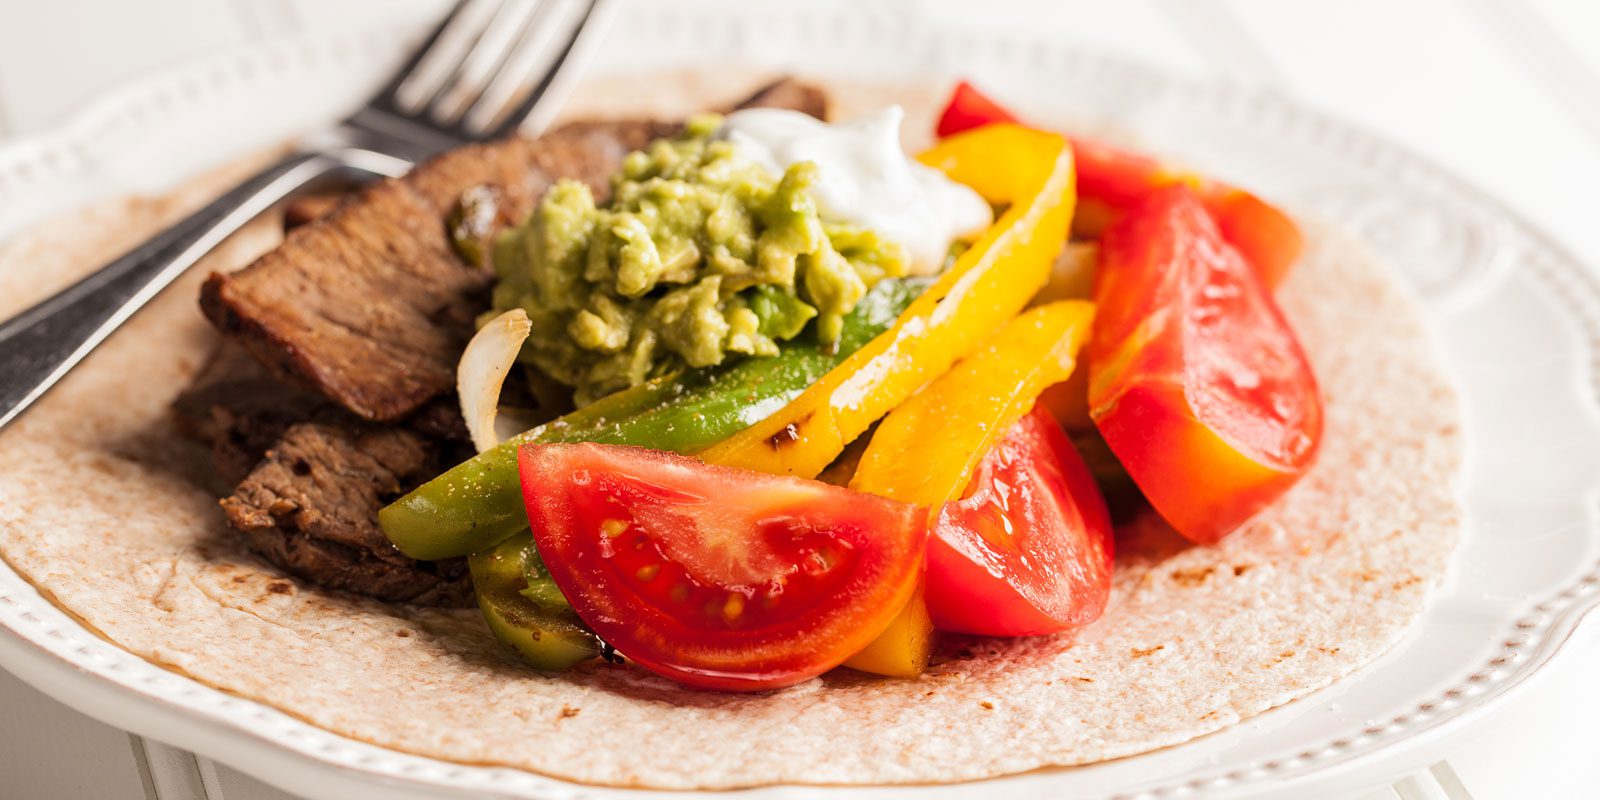 Lean Steak and Salad Wholemeal Wrap With Guacamole